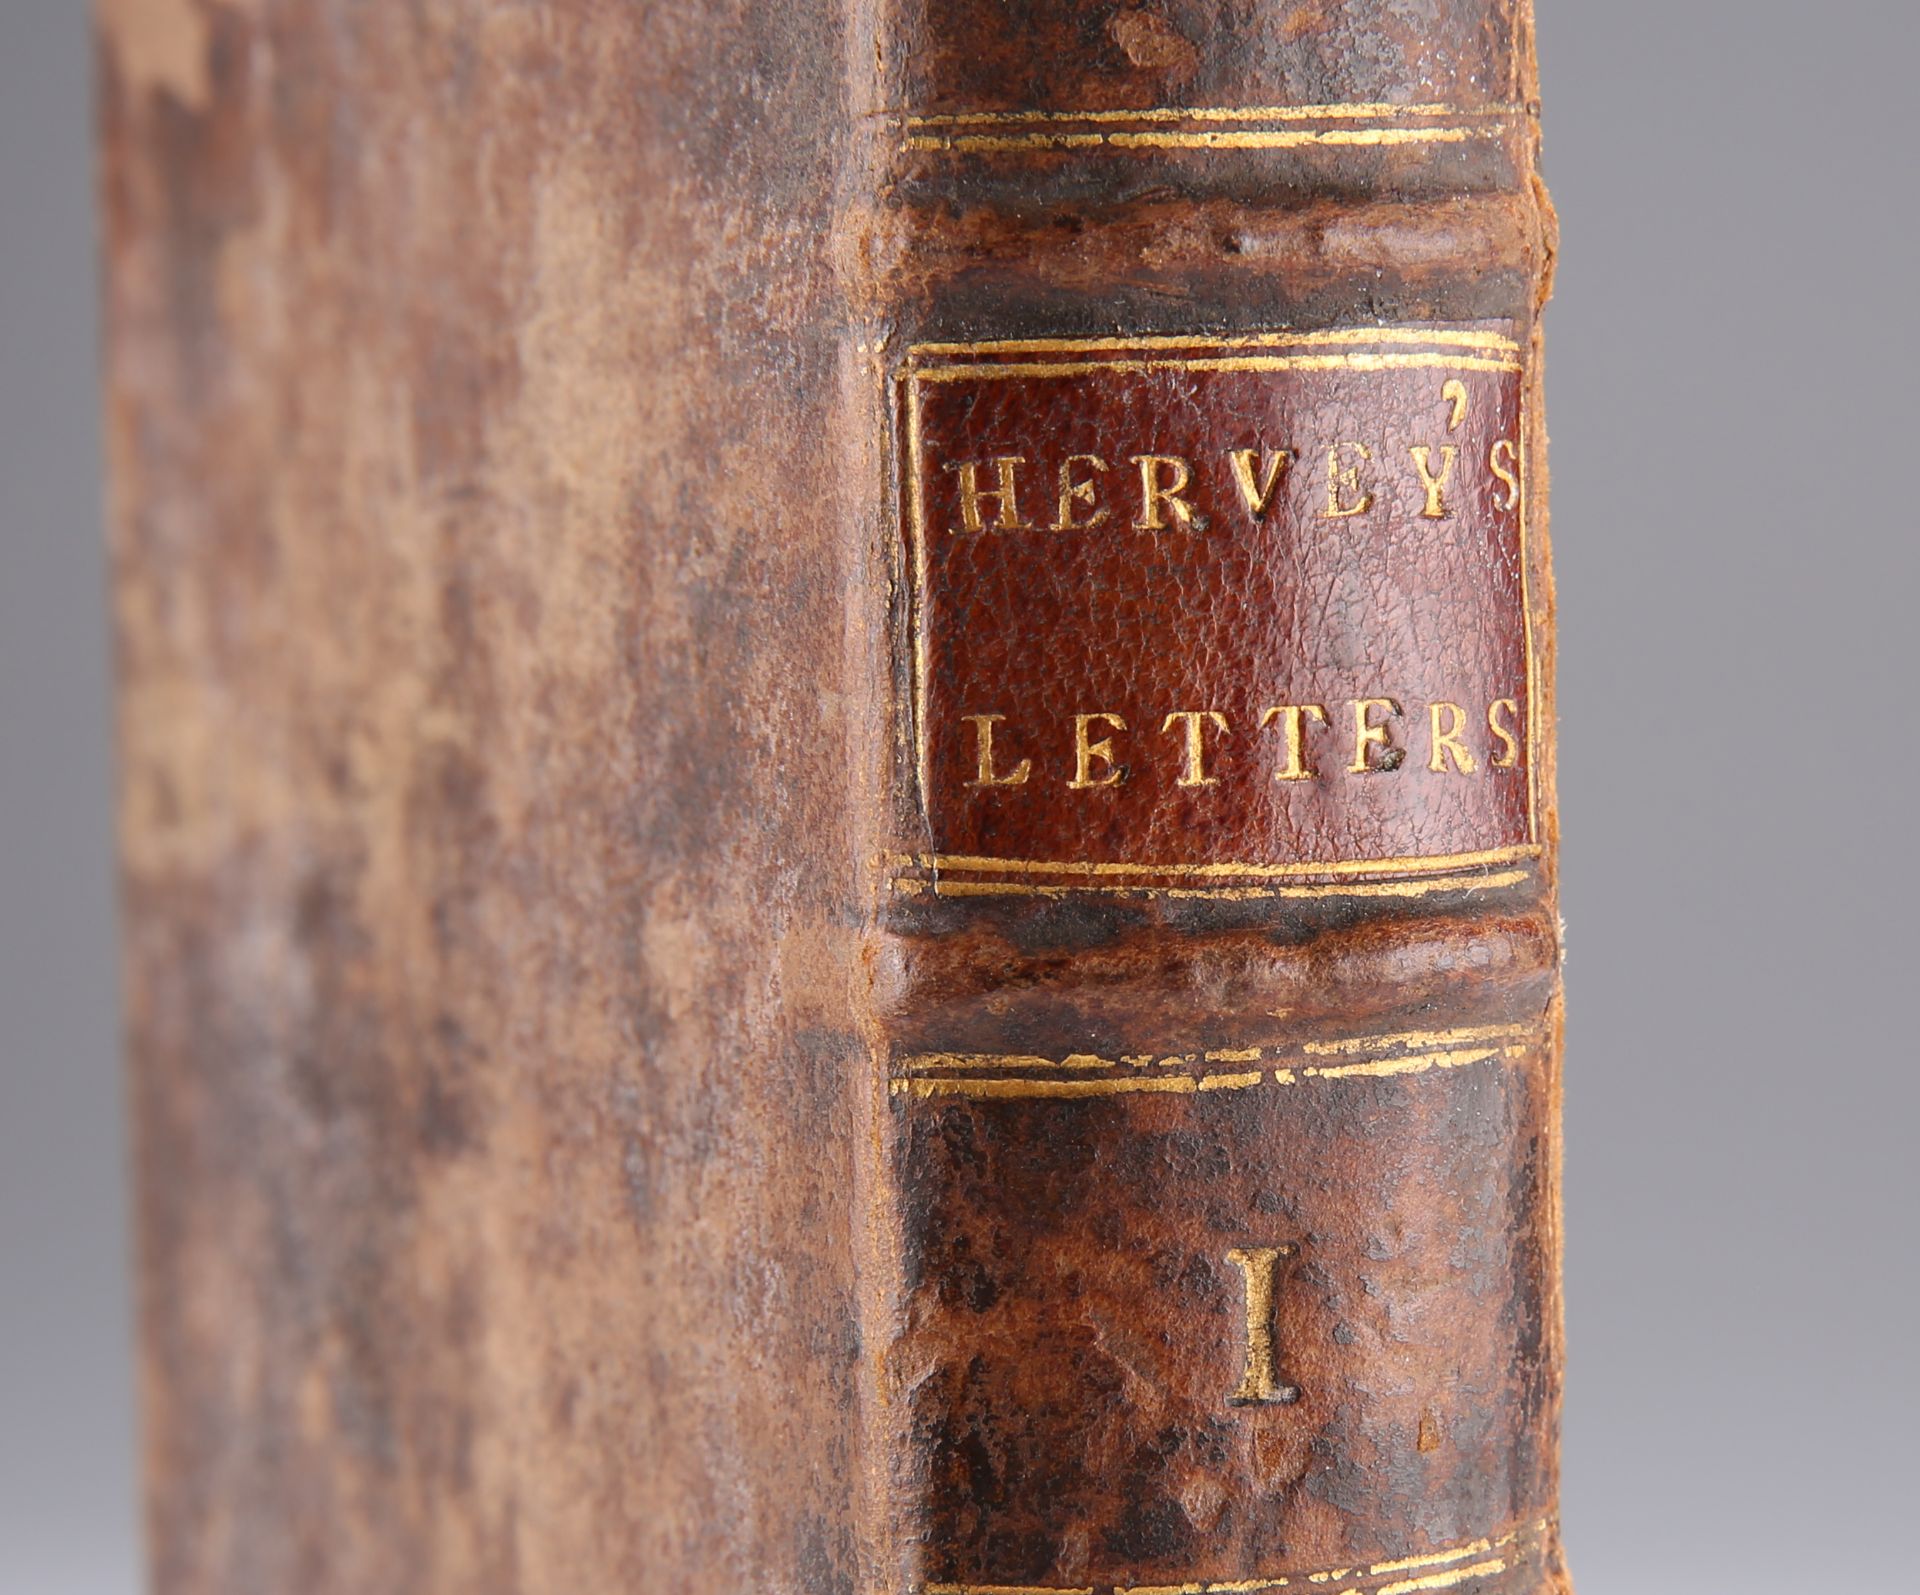 JAMES HERVEY, A.M., A COLLECTION OF LETTERS OF THE LATER REVEREND JAMES HERVEY, A.M., IN TWO VOLUMES - Image 2 of 2